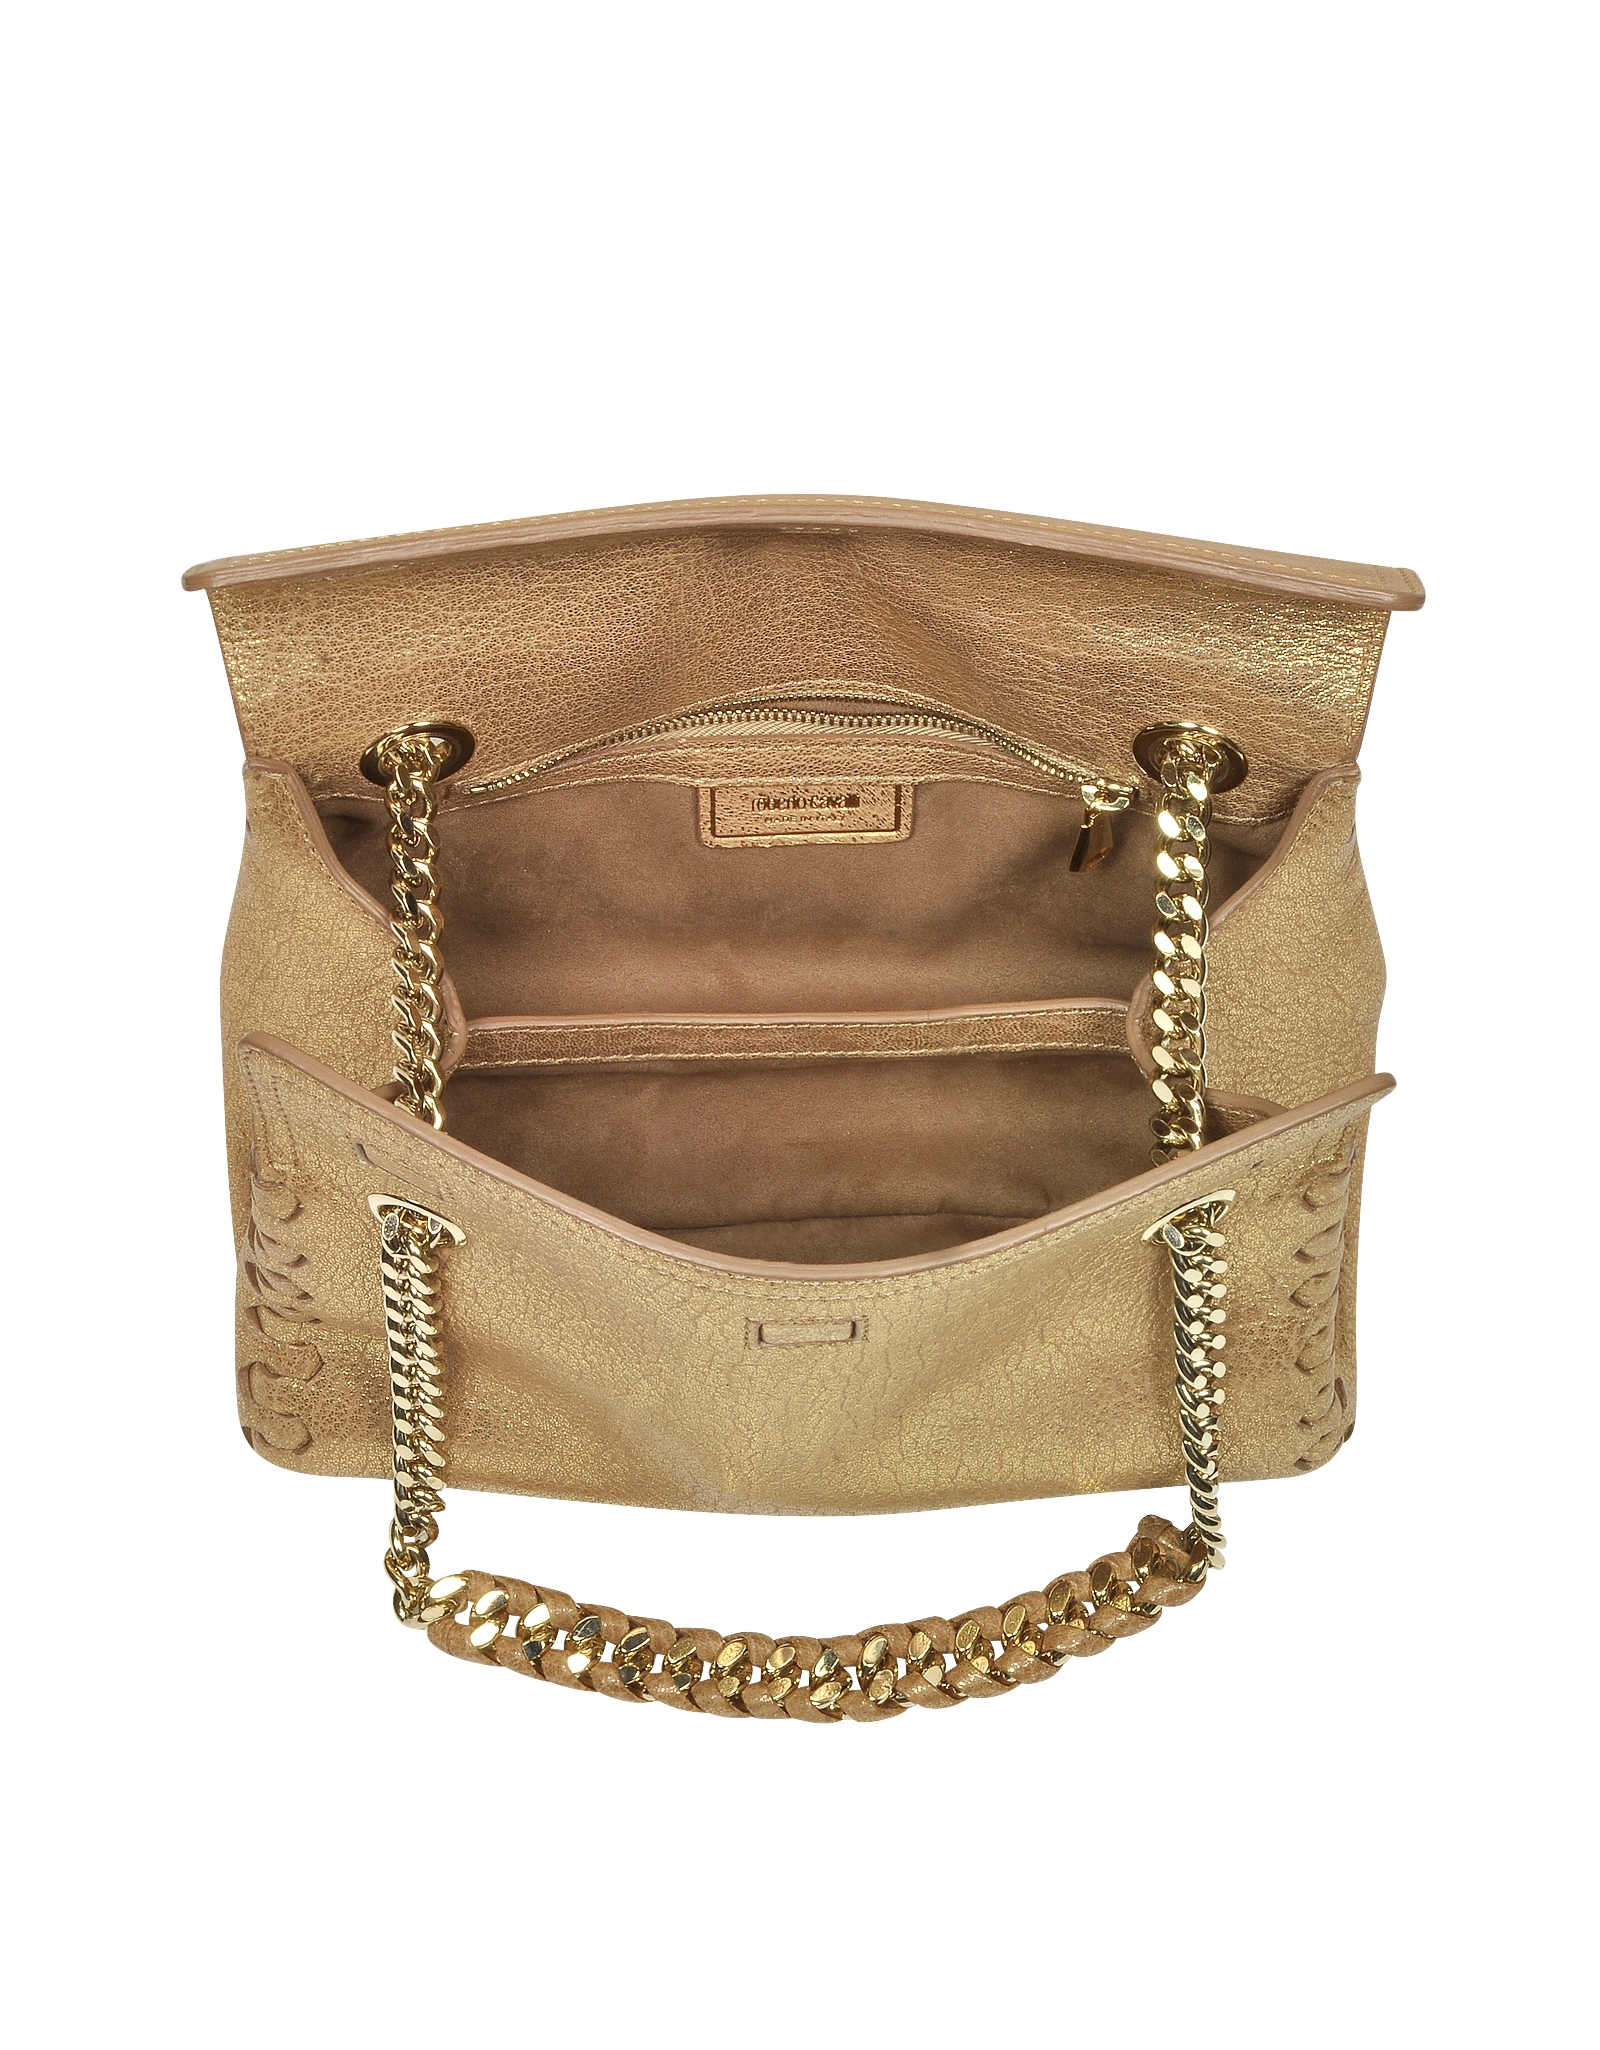 Roberto cavalli Gold Laminated Leather Crossbody Bag W/Chain Strap in Gold | Lyst